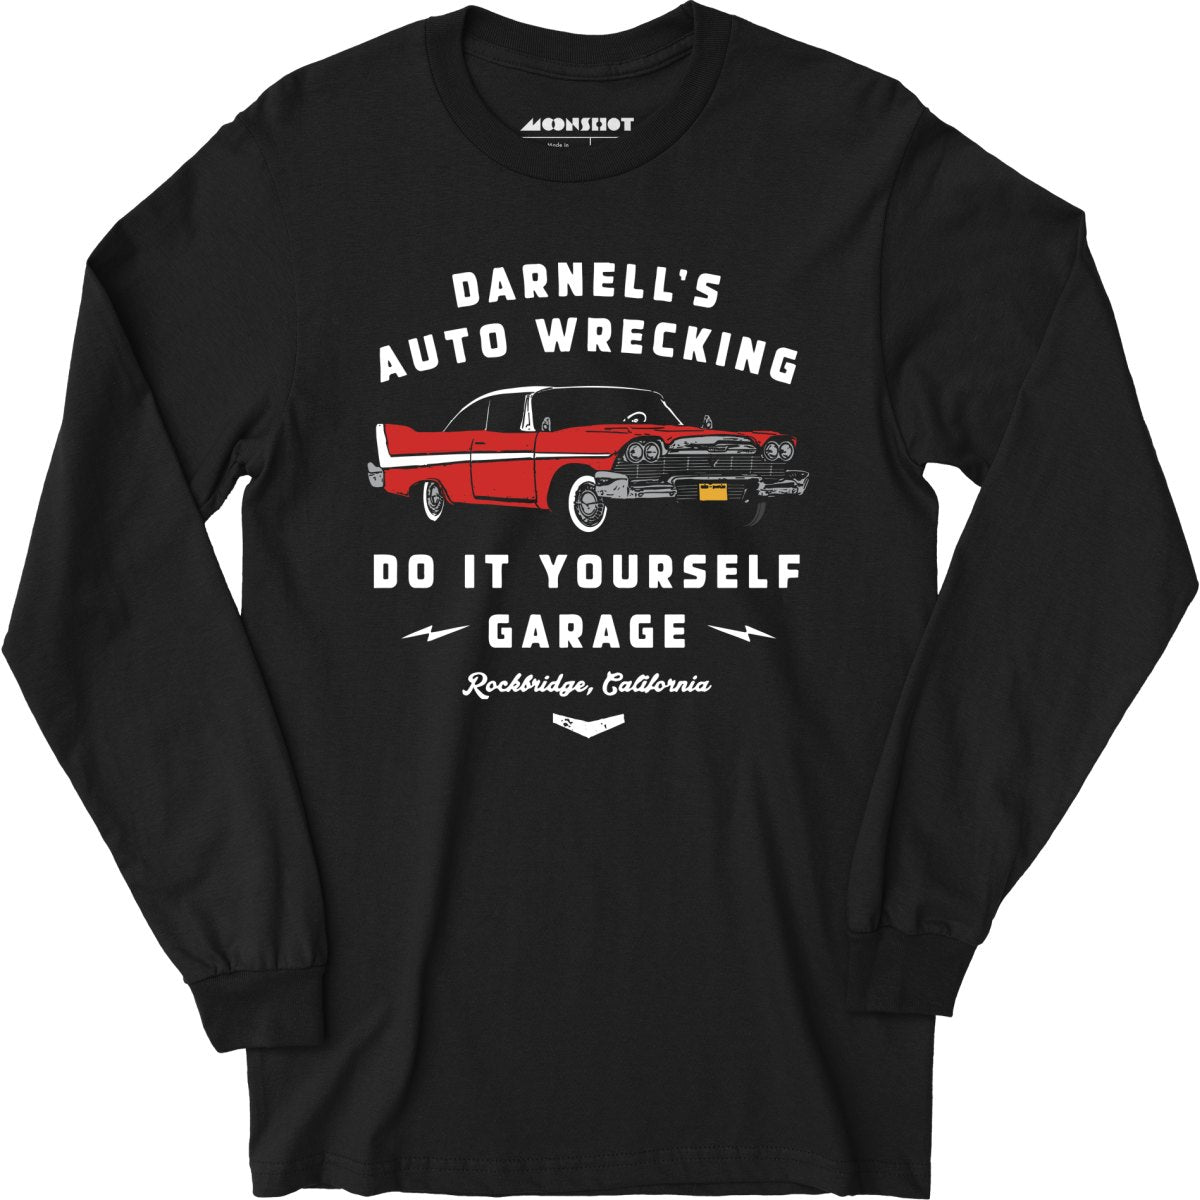 Darnell's Auto Wrecking - Do it Yourself Garage - Long Sleeve T-Shirt